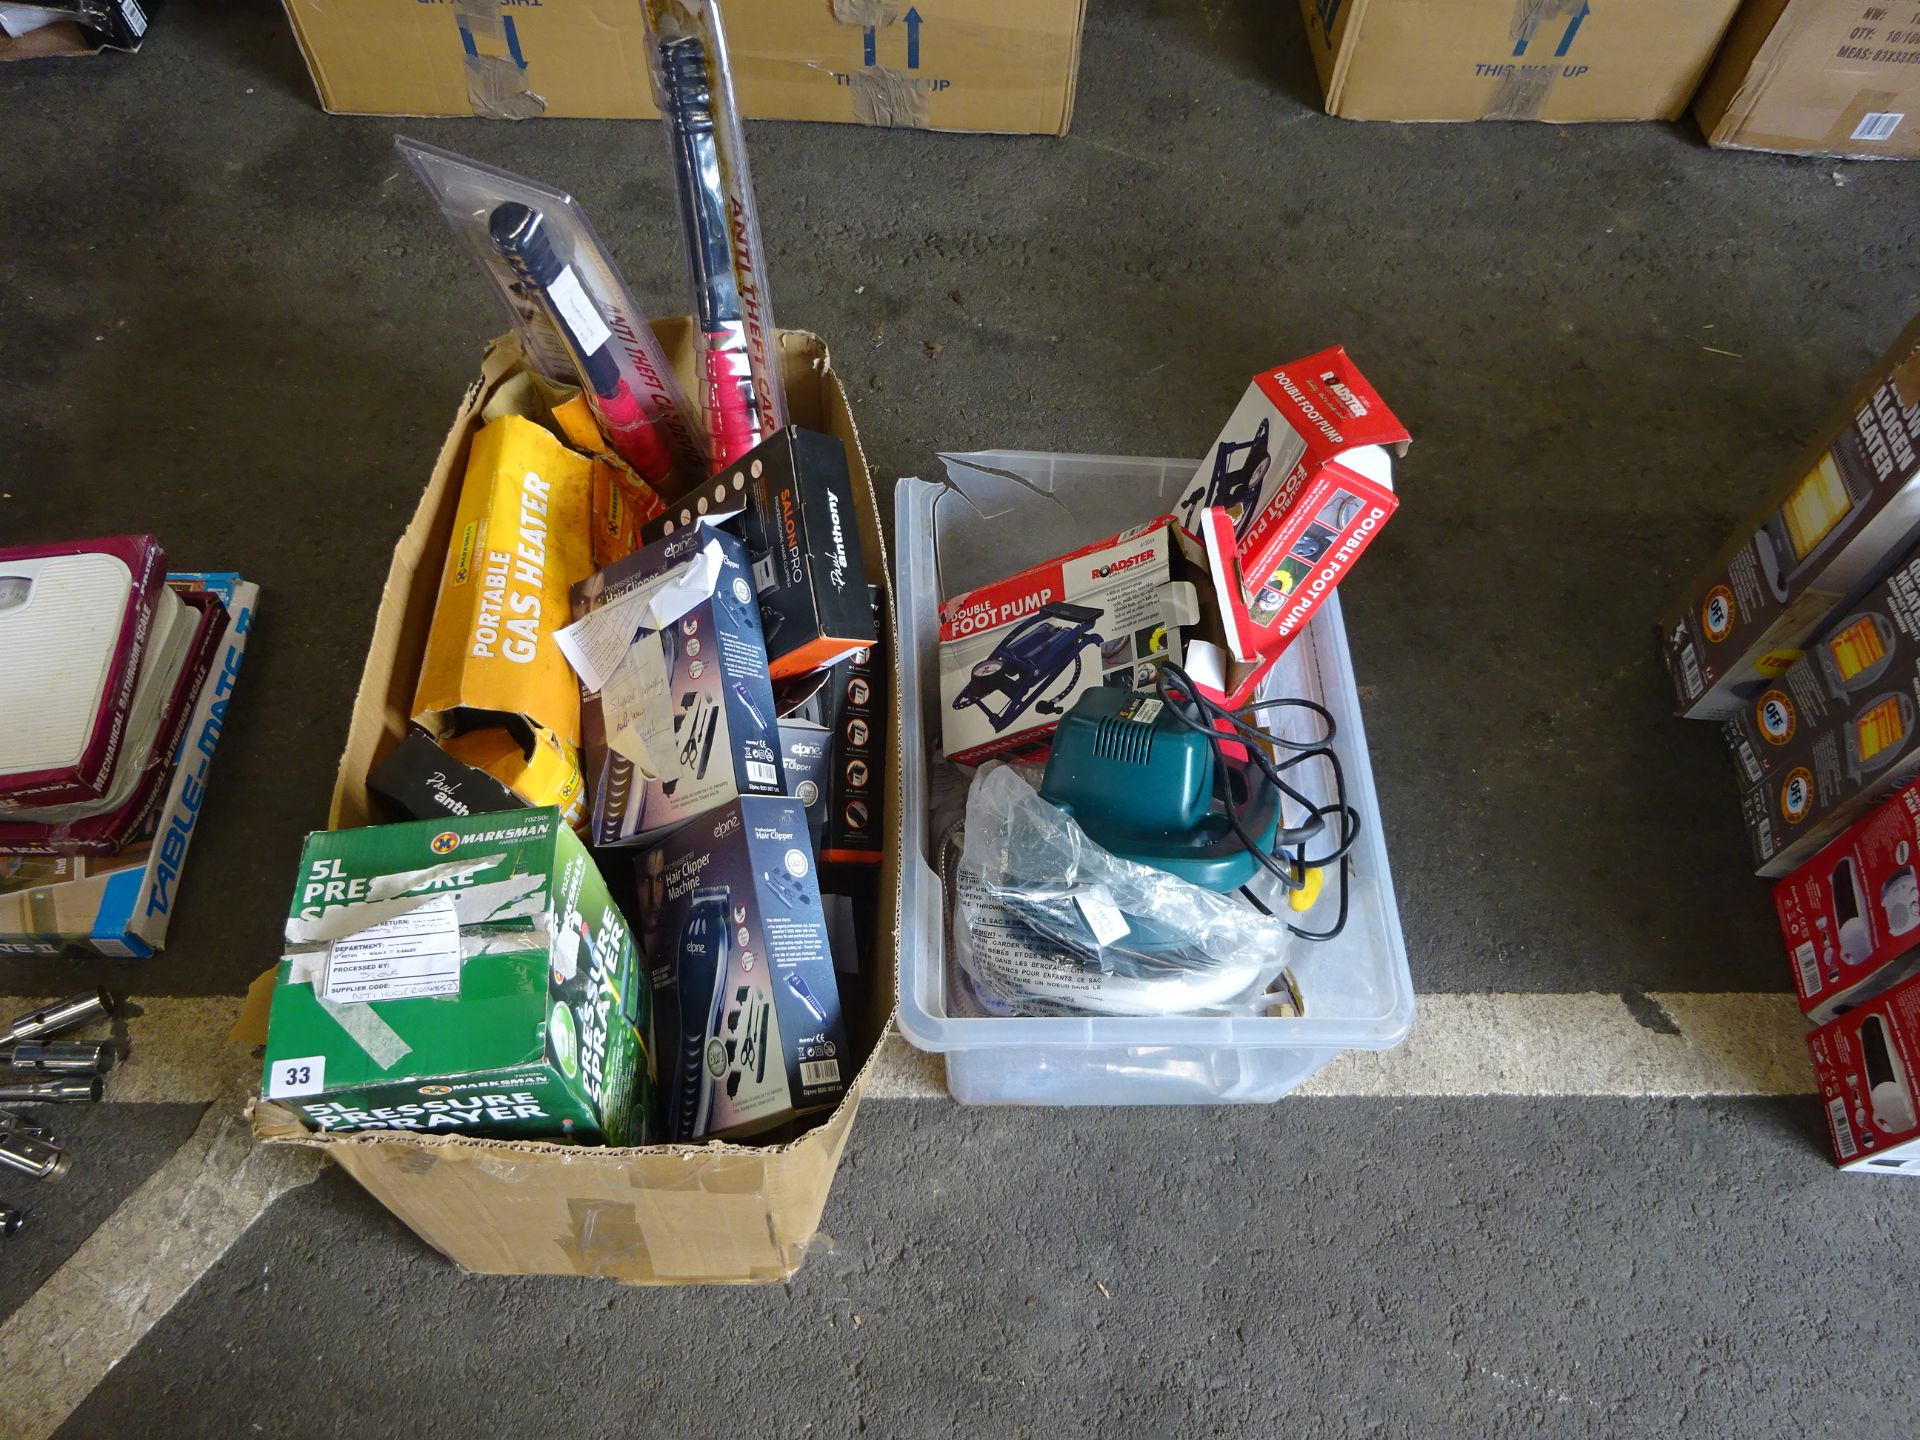 2 BOXES CONTAINING PORTABLE GAS HEATER, CLIPPERS, PRESS SPRAYER, CAR ANTI THEFT DEVICES ETC